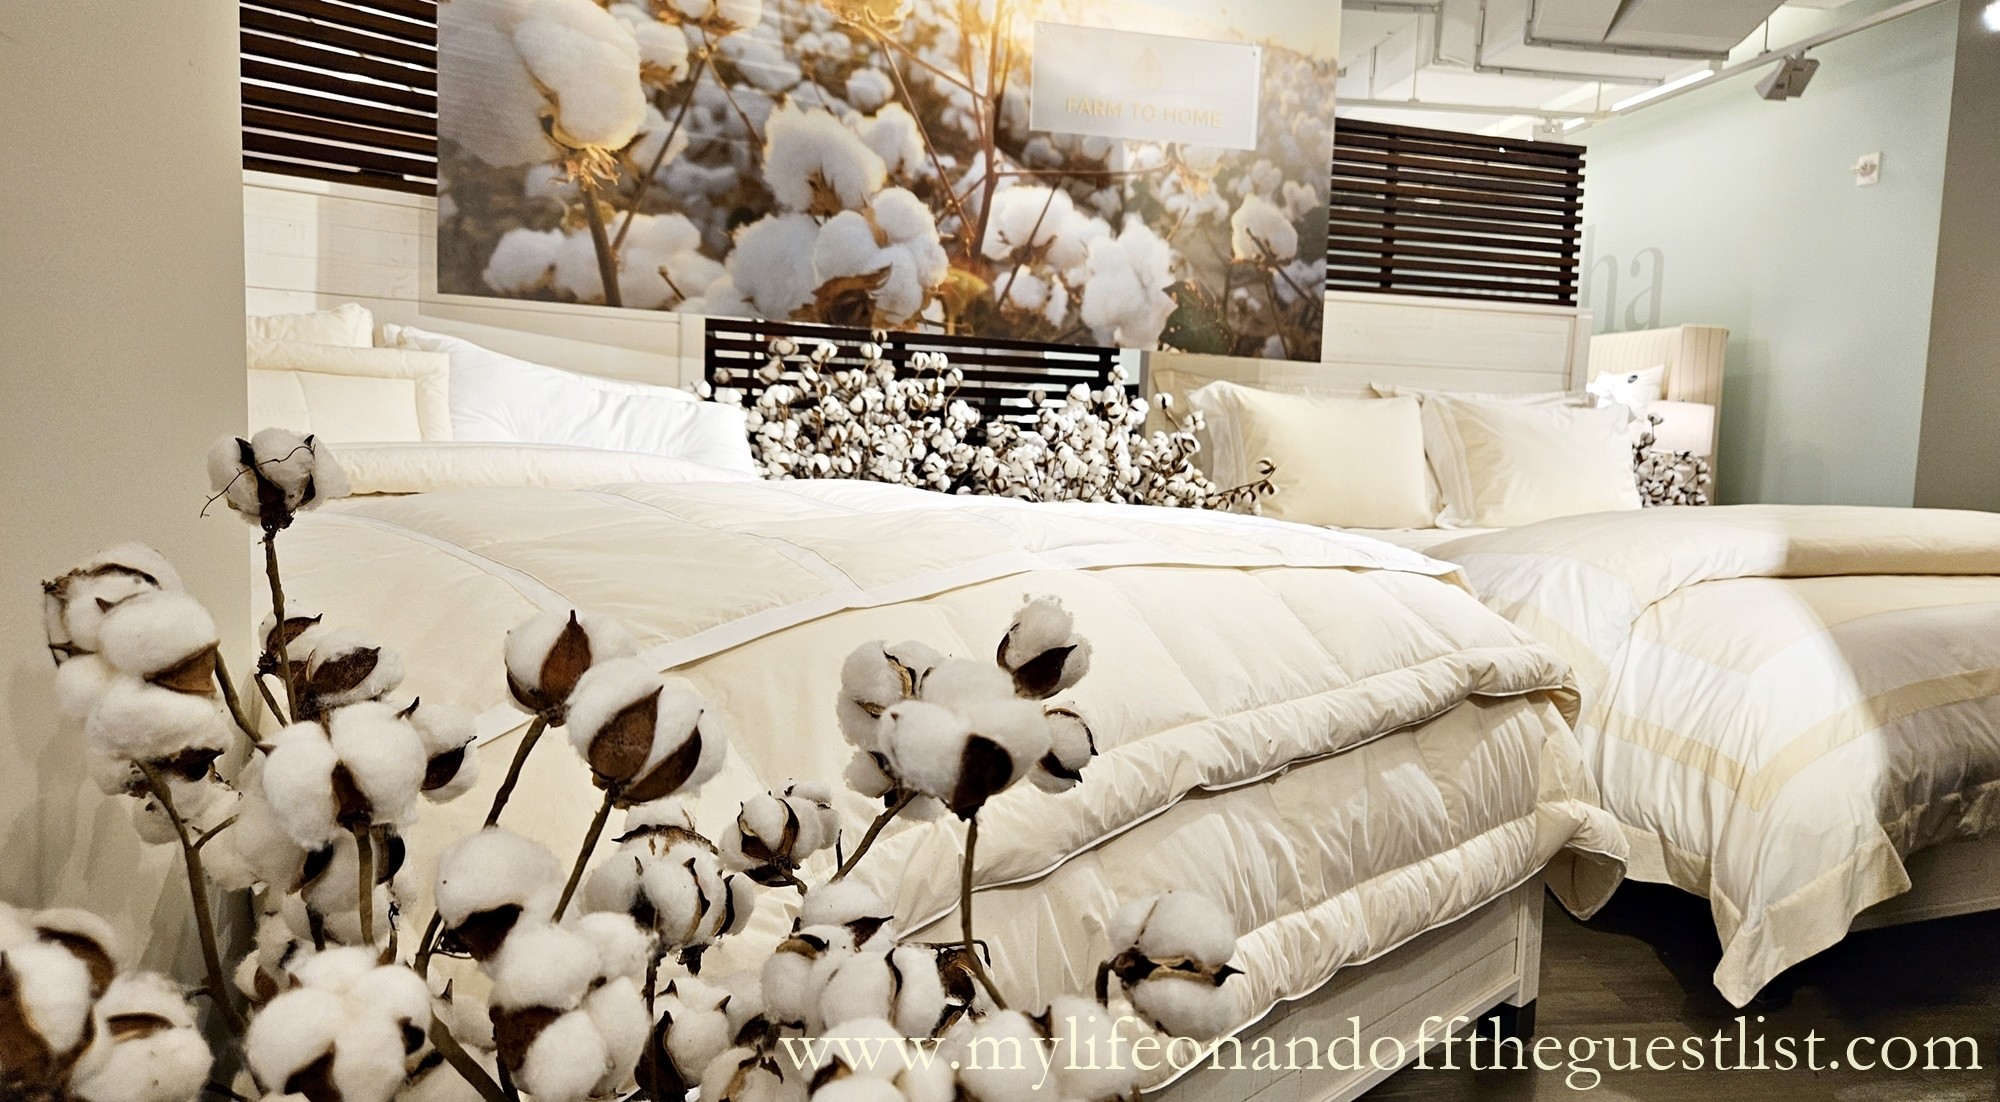 Get in Bed with the Farm to Home Sustainable Home Fashions